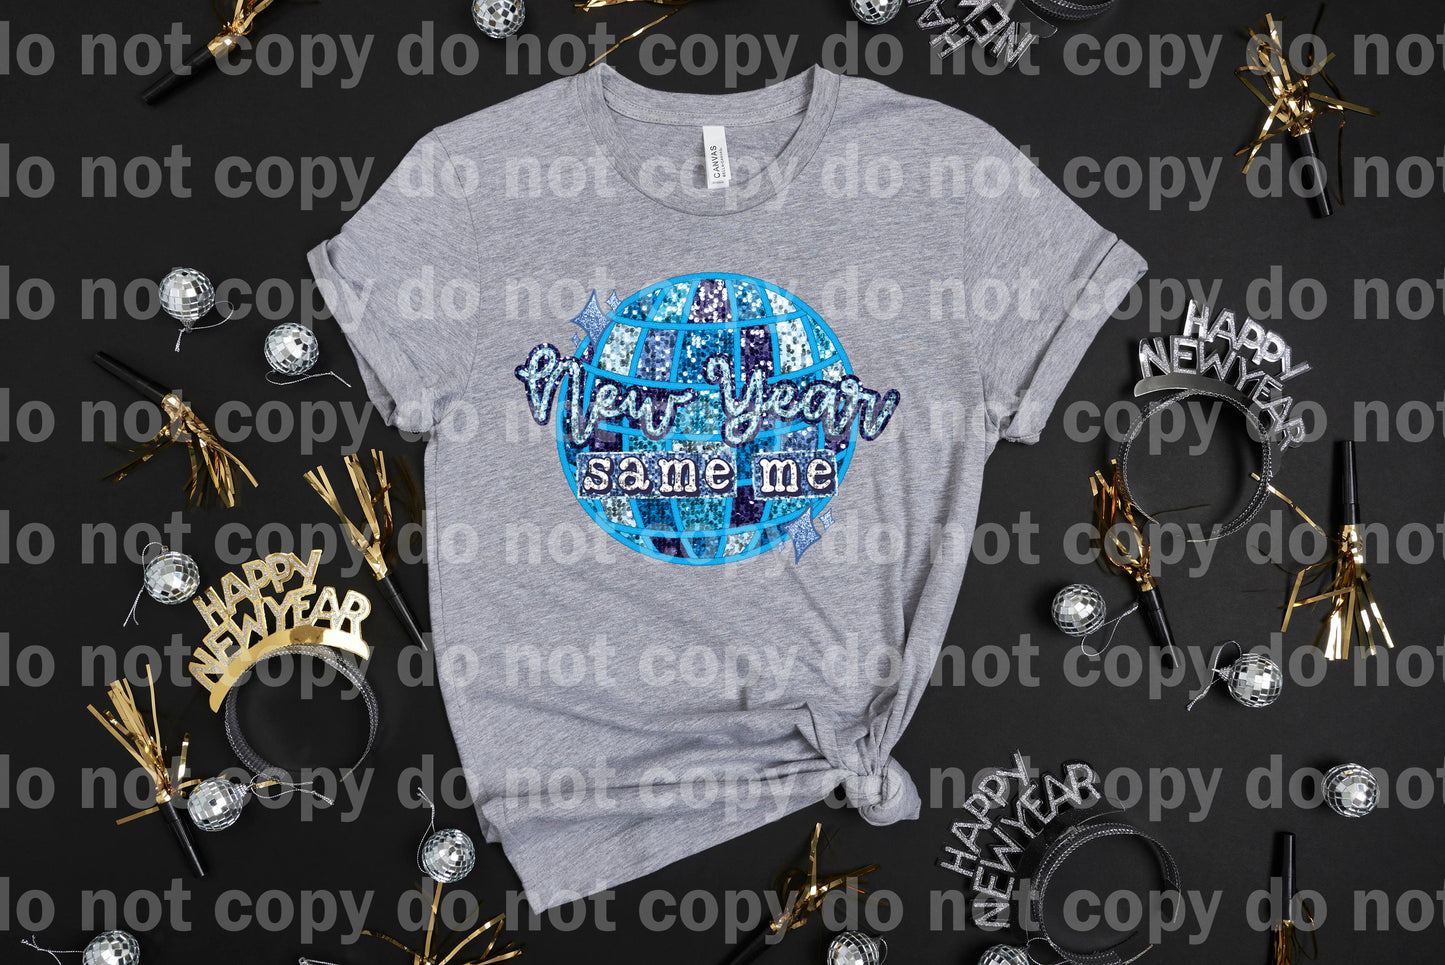 New Year Same Me Disco Ball with Optional Sleeve Design Dream Print or Sublimation Print